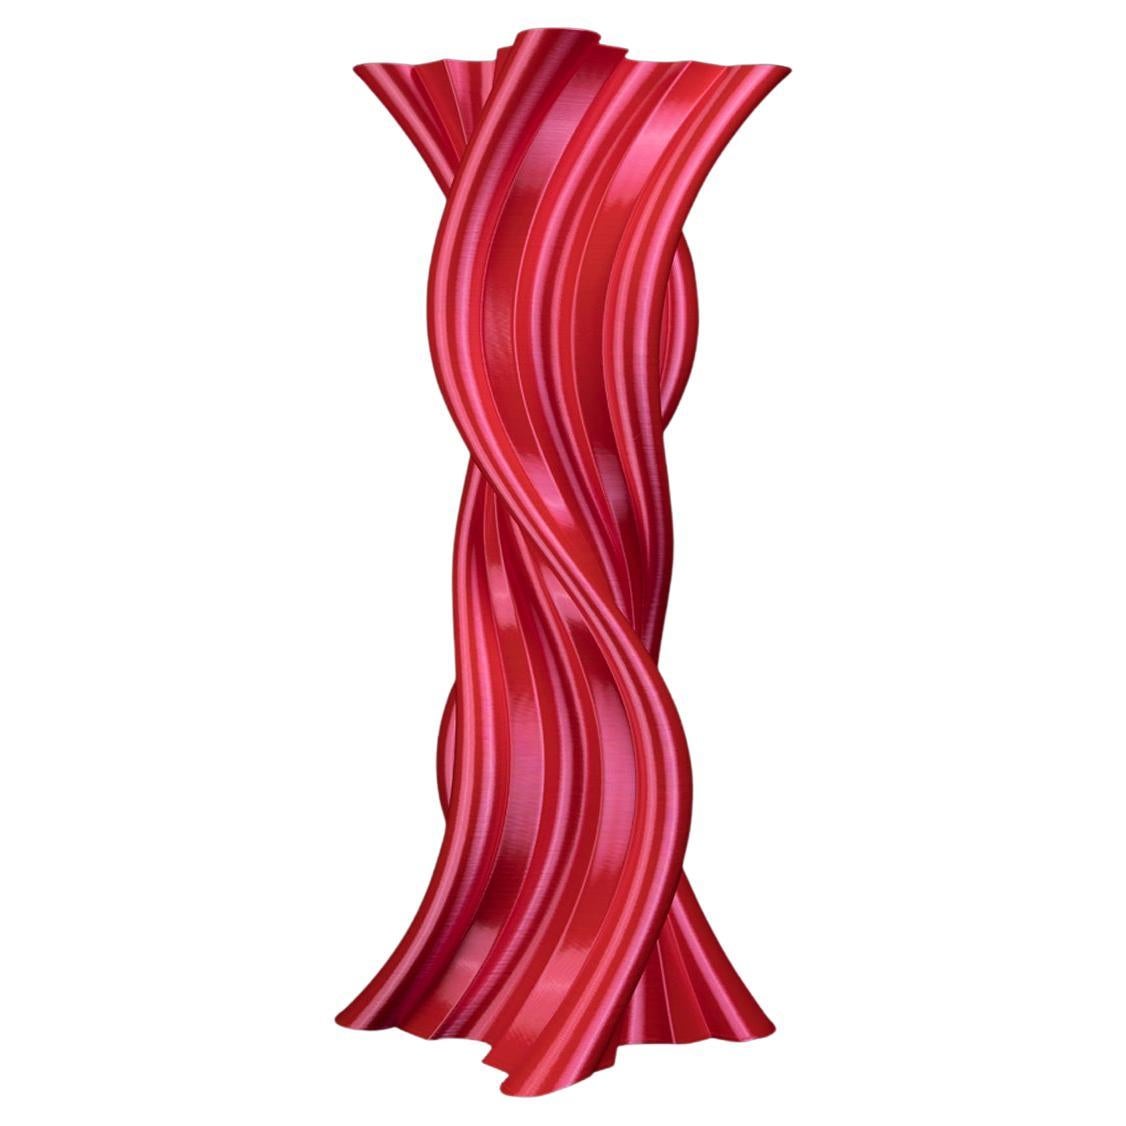 Tersicore, Red Contemporary Sustainable Vase-Sculpture